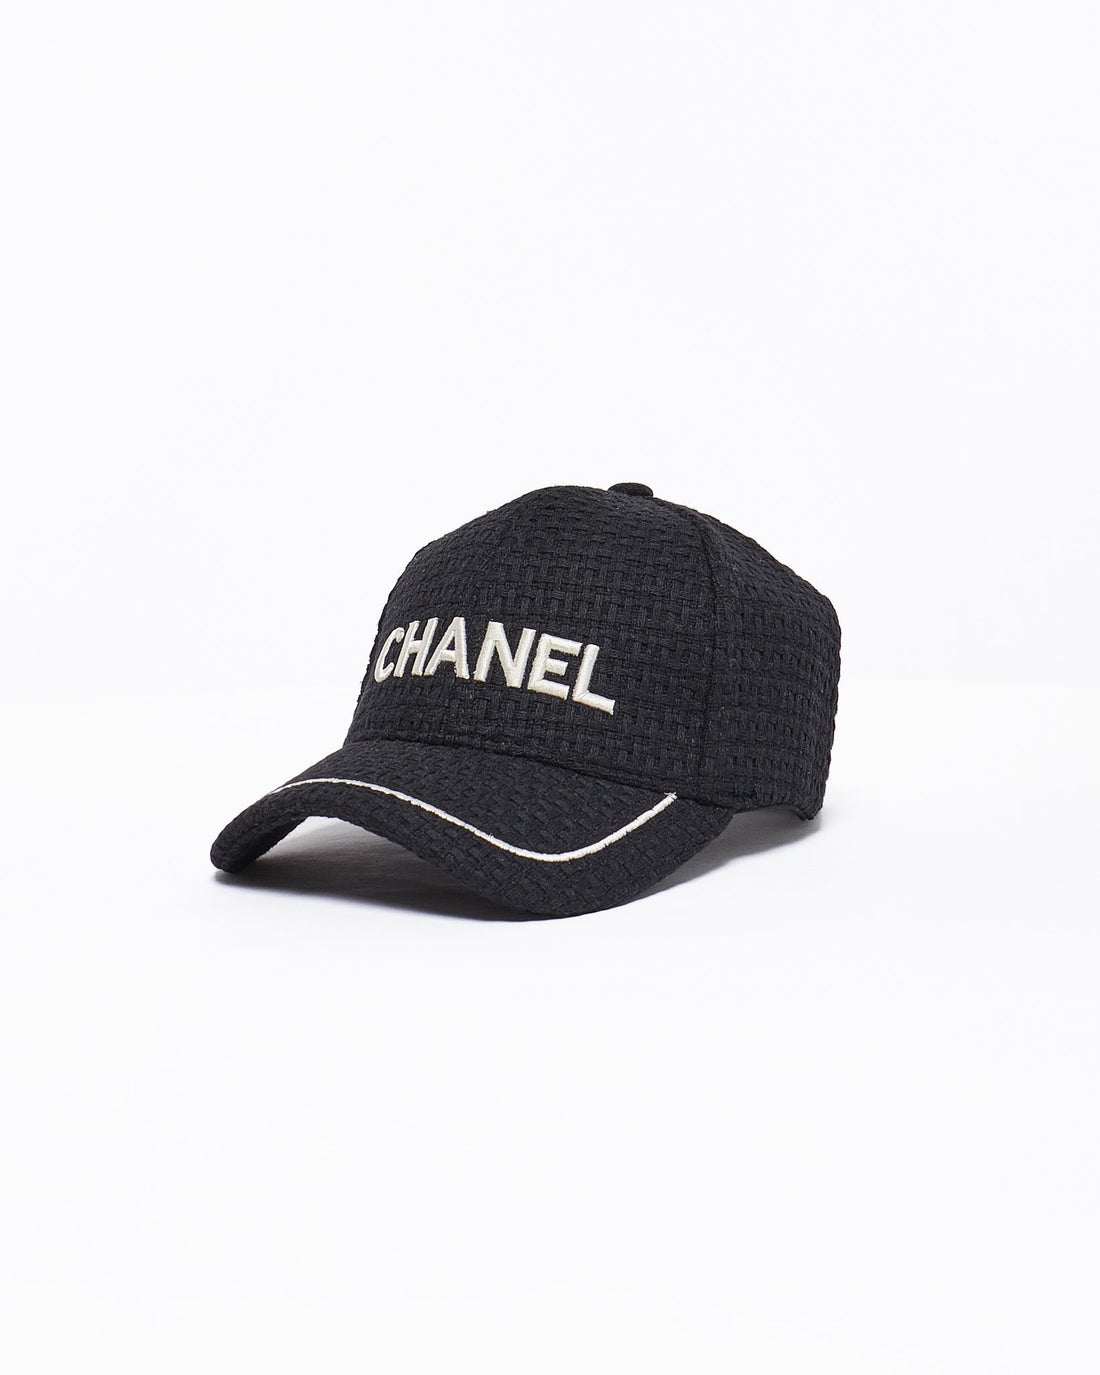 MOI OUTFIT-Logo Embroidered Tweed Cap 12.90